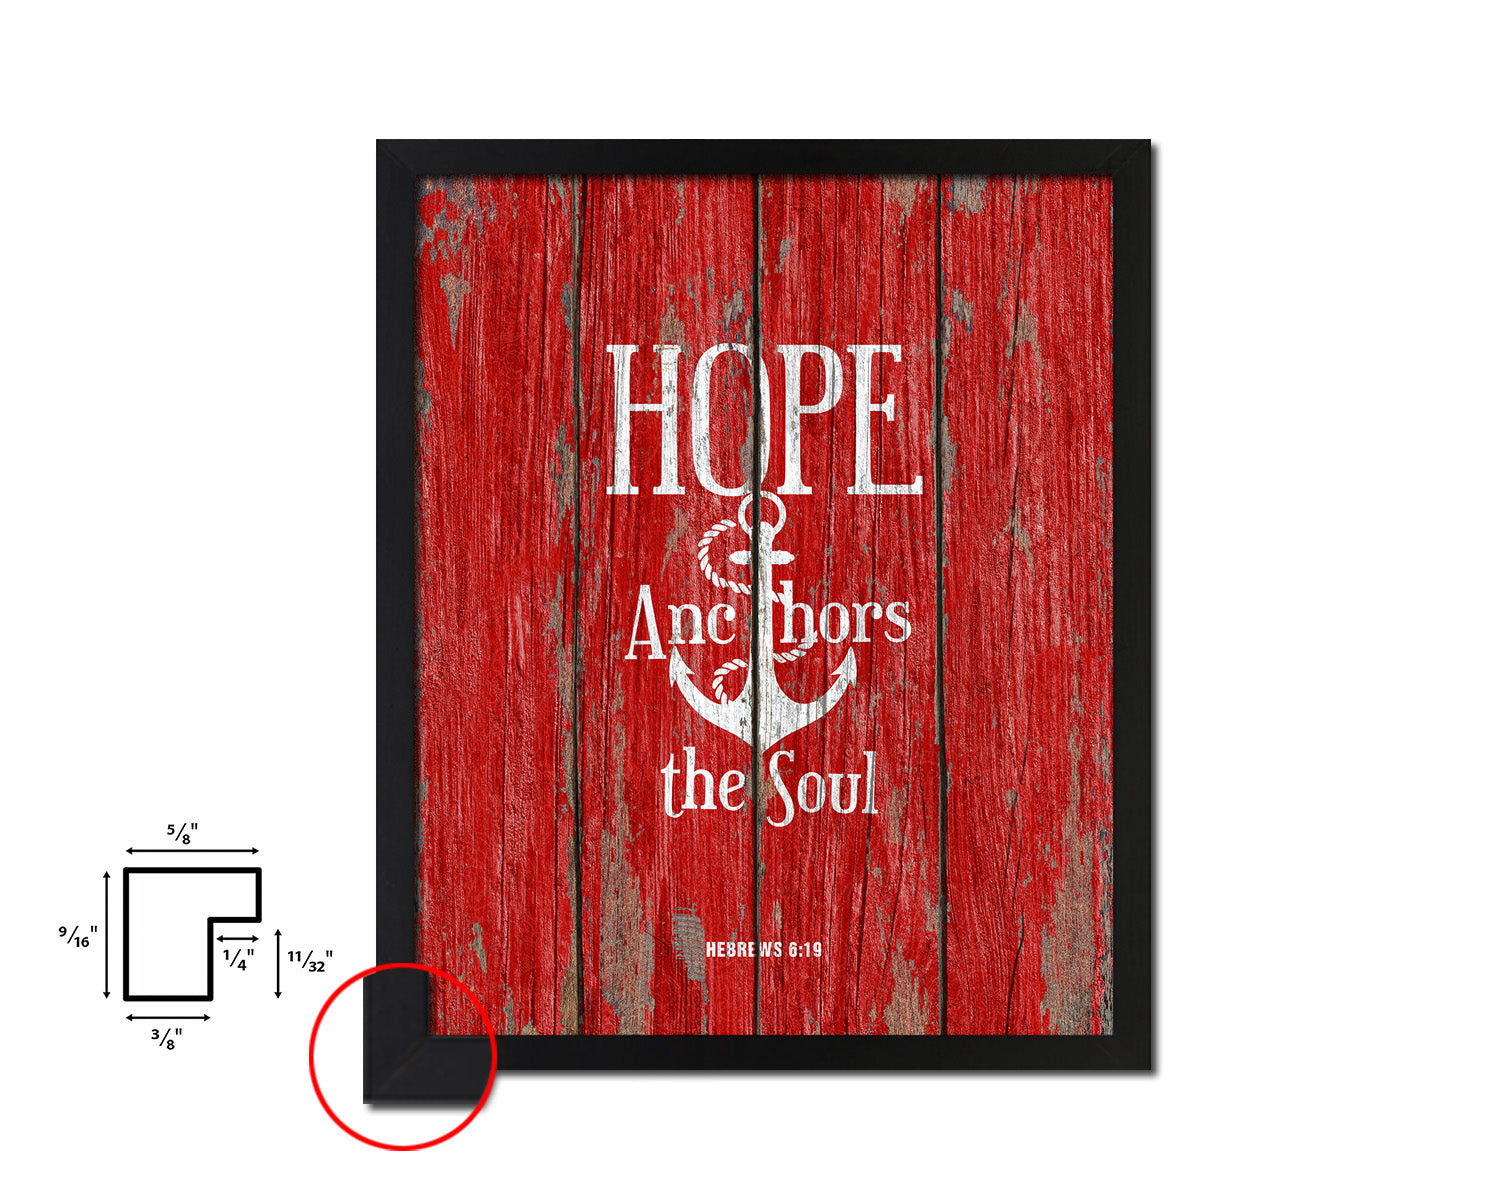 Hope anchors the soul, Hebrews 6:19 Quote Framed Print Home Decor Wall Art Gifts